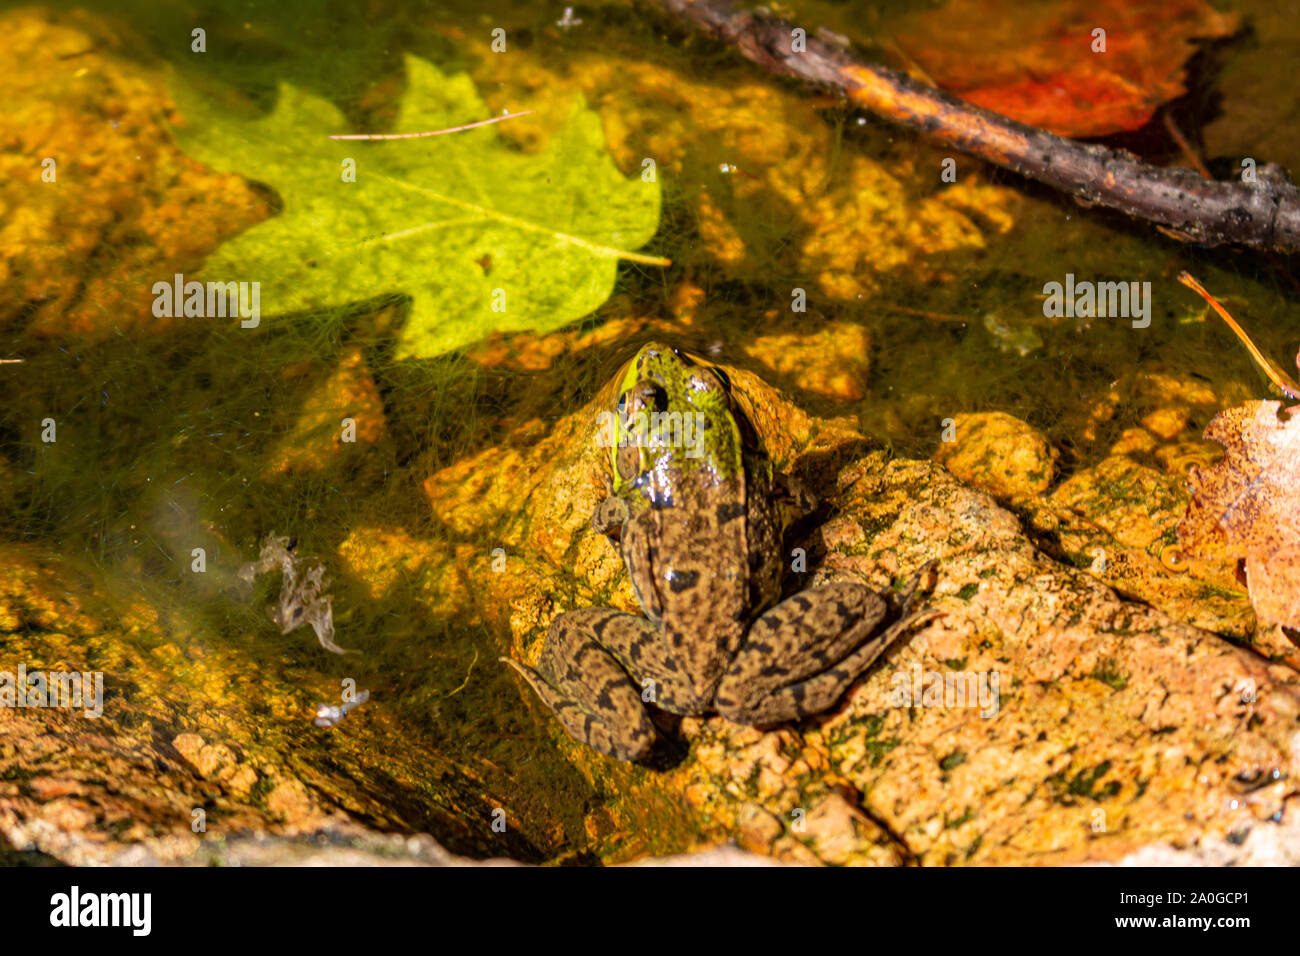 A green frog sits in a small pool of water on the rocks of a forest, with a fallen leaf floating beside it. Stock Photo